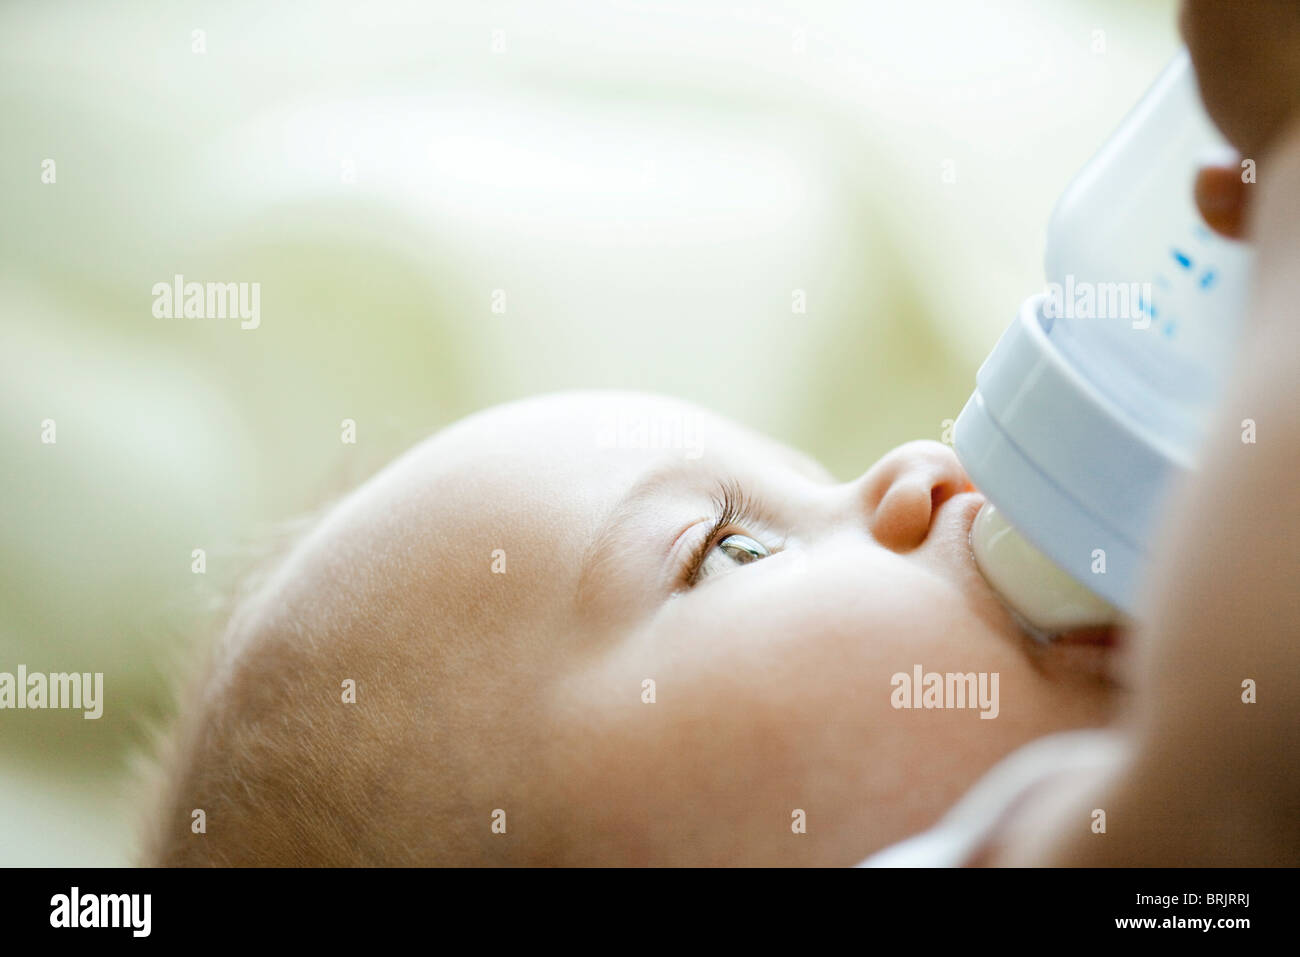 Baby drinking from bottle Stock Photo